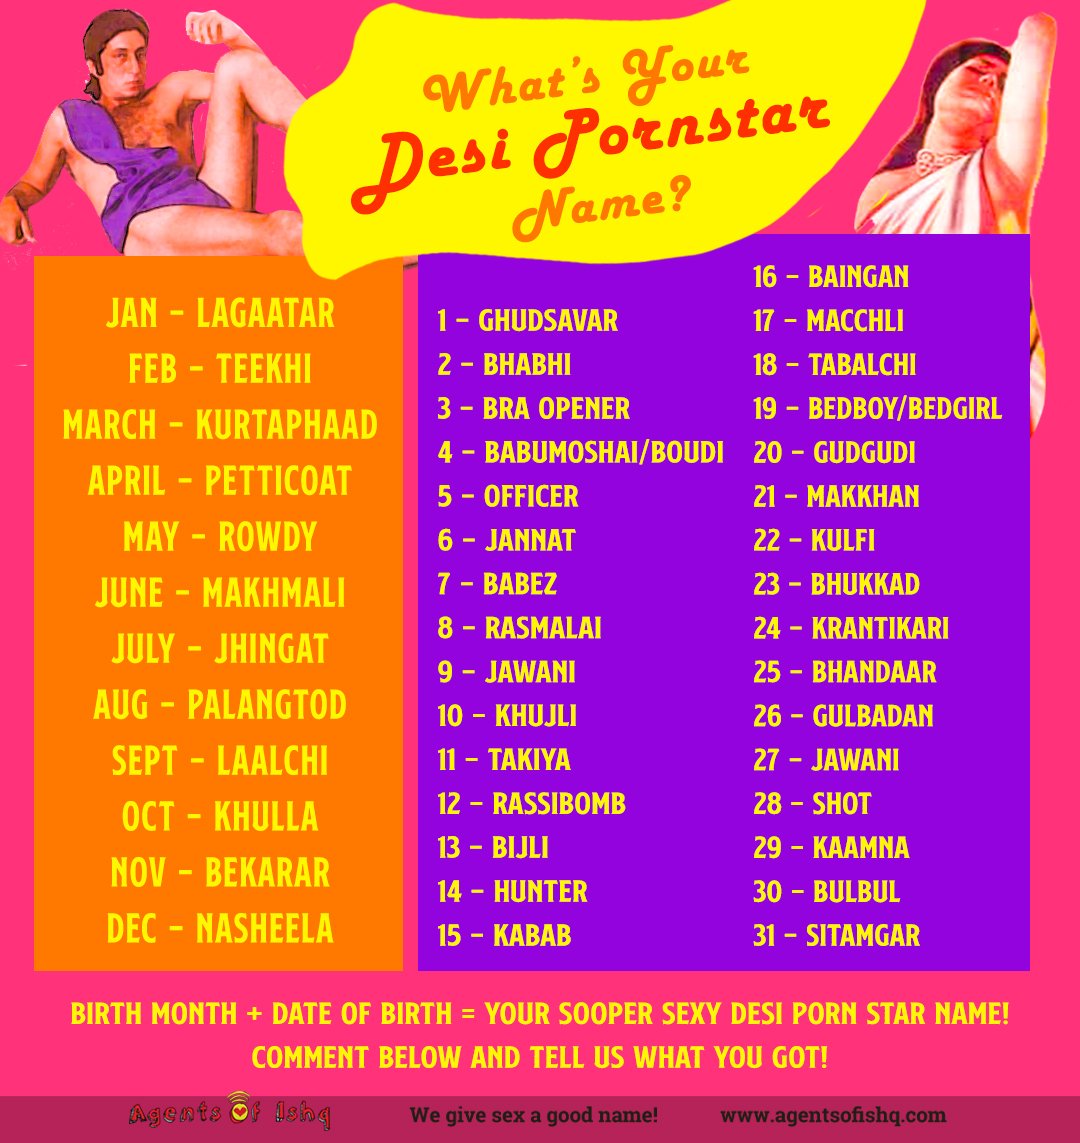 This Desi Pornstar name generator will make your saturday sexier! 